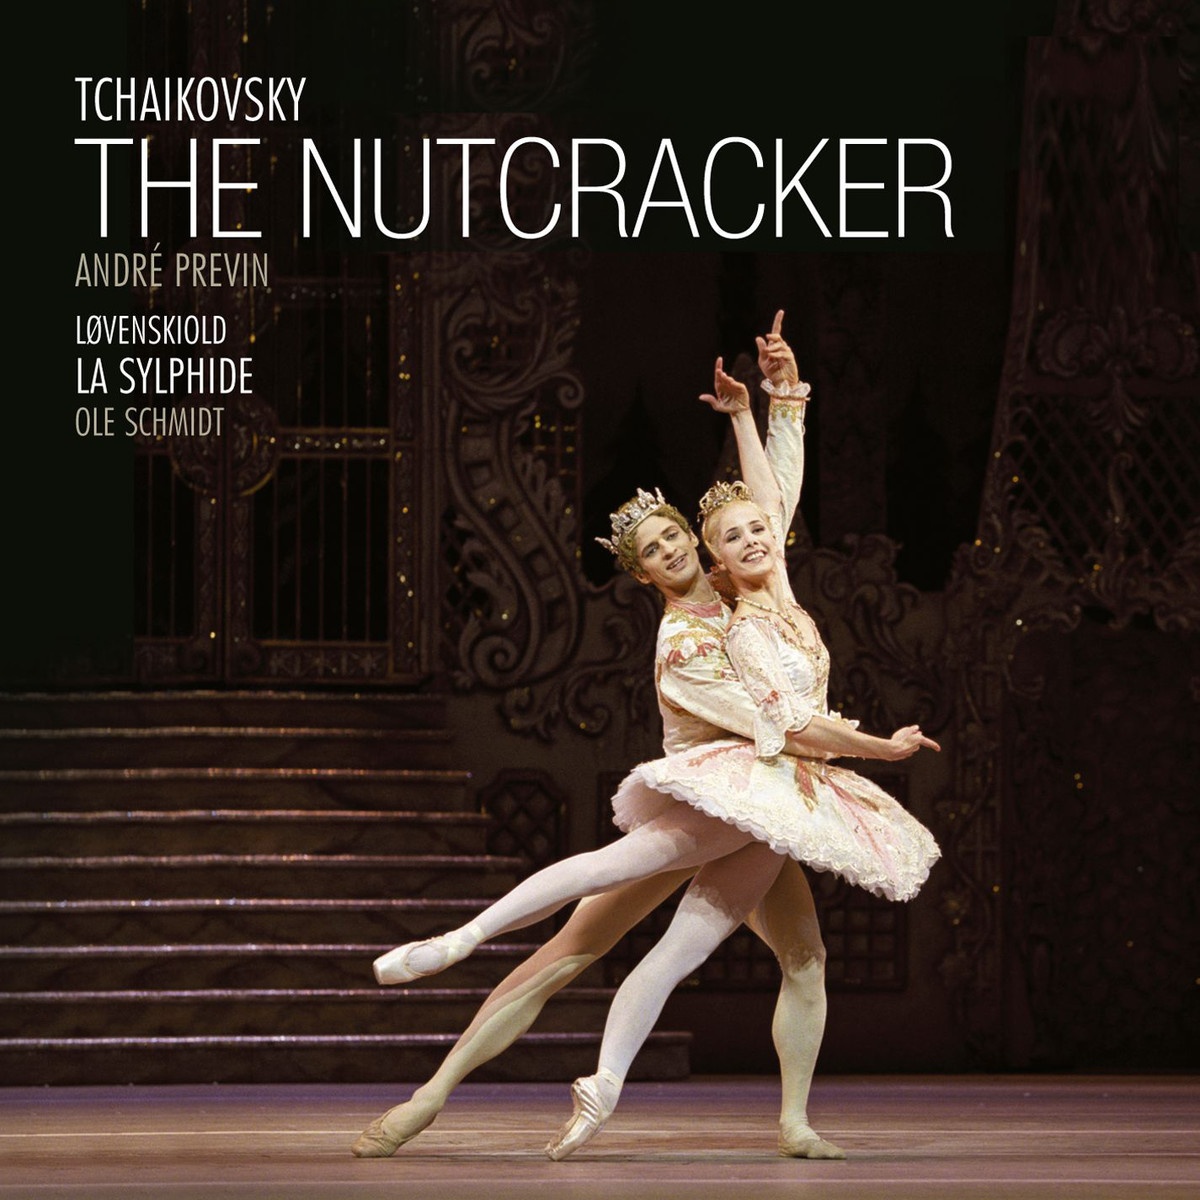 The Nutcracker - Ballet in two acts Op. 71, Act II: Waltz of the Flowers